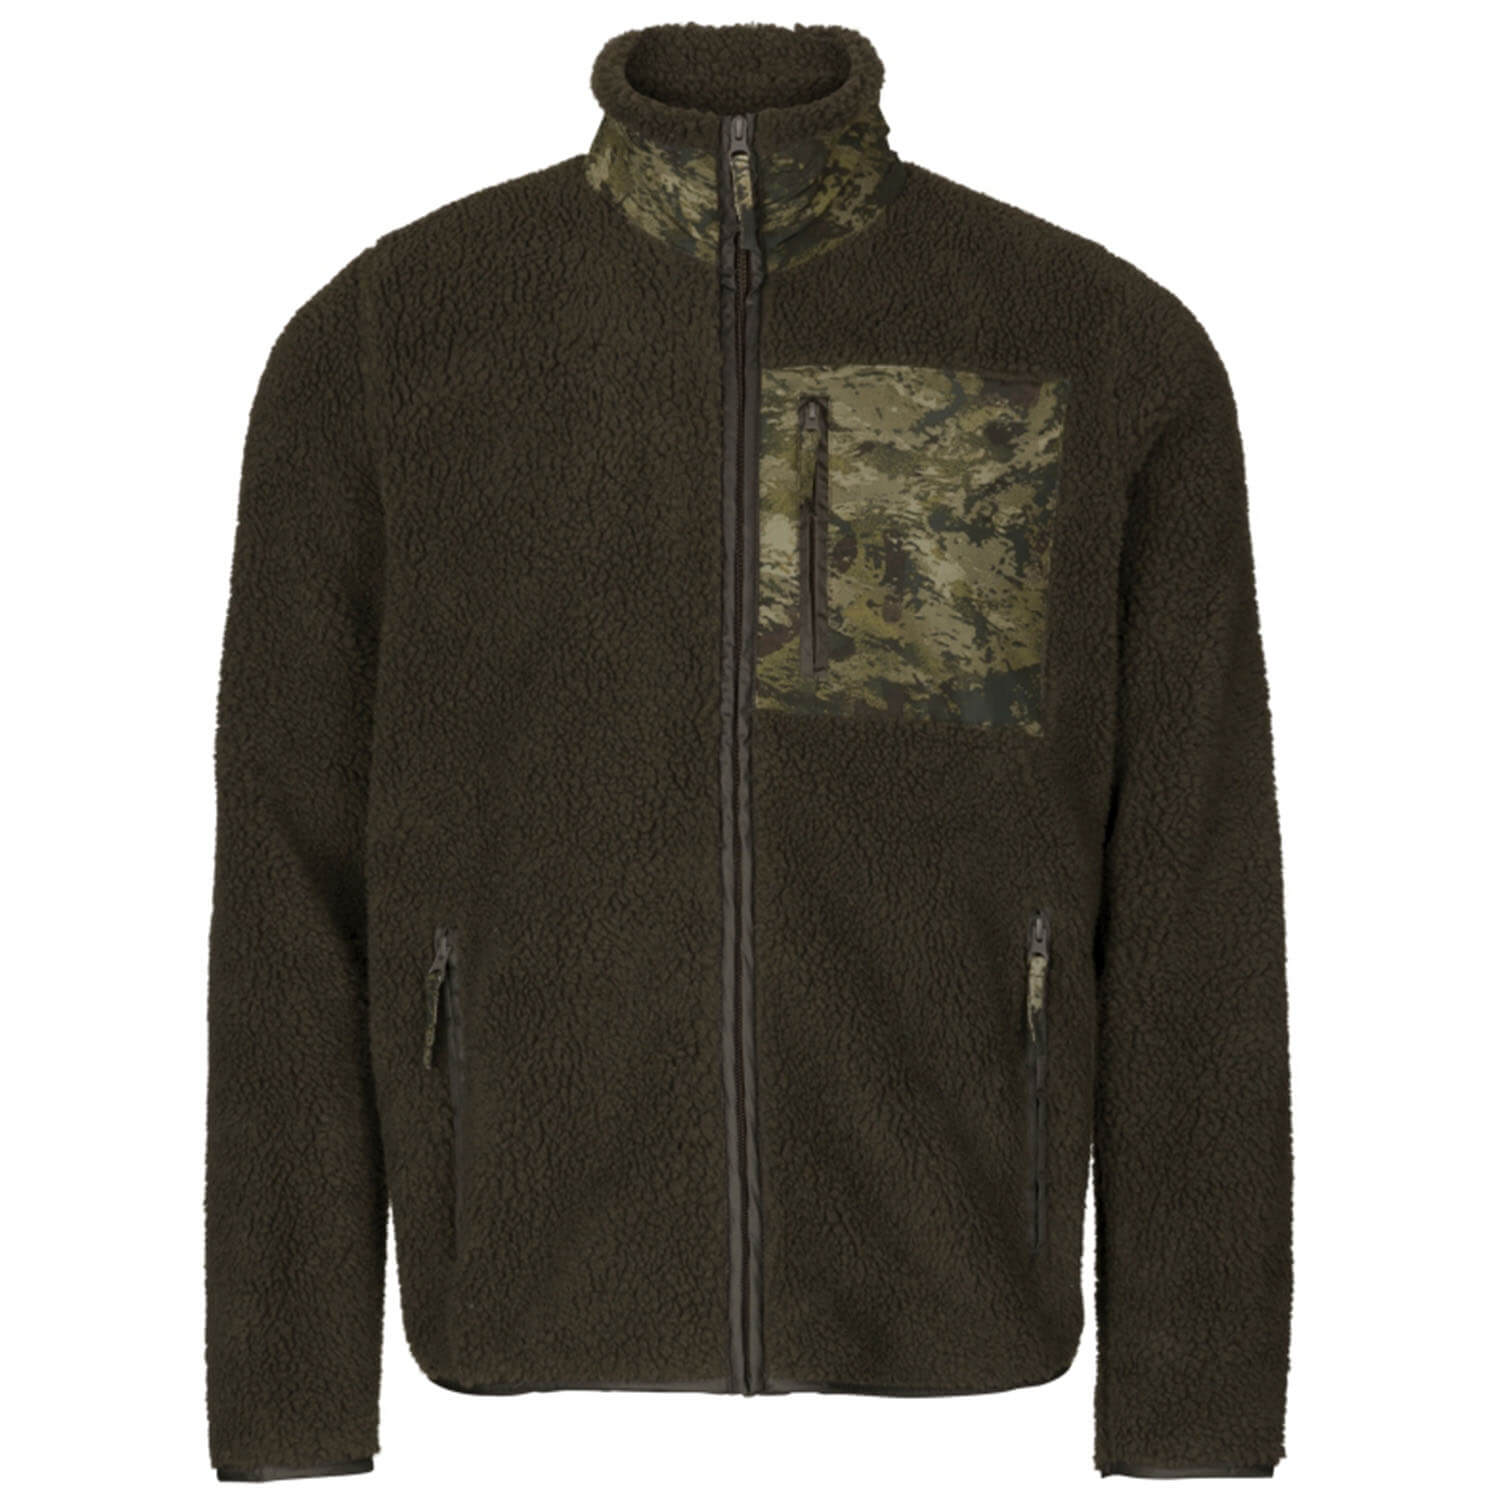  Seeland fleece jacket Zephyr (Grizzly Brown/InVis Green)